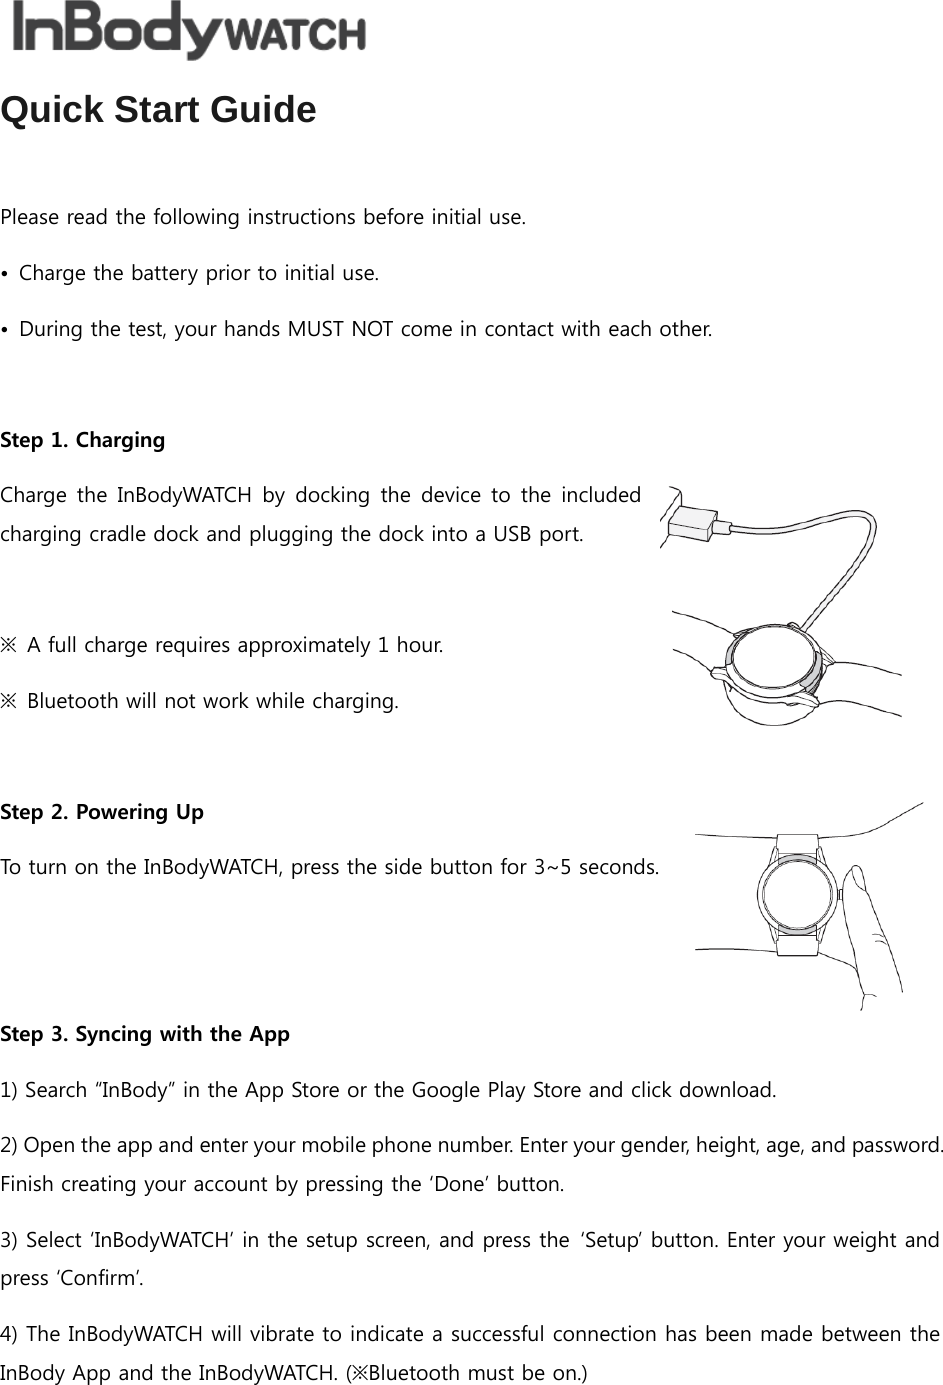  Quick Start Guide  Please read the following instructions before initial use. •  Charge the battery prior to initial use. •  During the test, your hands MUST NOT come in contact with each other.  Step 1. Charging Charge the  InBodyWATCH  by docking  the device  to  the  included charging cradle dock and plugging the dock into a USB port.  ※  A full charge requires approximately 1 hour. ※  Bluetooth will not work while charging.  Step 2. Powering Up To turn on the InBodyWATCH, press the side button for 3~5 seconds.    Step 3. Syncing with the App 1) Search “InBody” in the App Store or the Google Play Store and click download. 2) Open the app and enter your mobile phone number. Enter your gender, height, age, and password. Finish creating your account by pressing the ‘Done’ button. 3) Select ‘InBodyWATCH’ in the setup screen, and press the  ‘Setup’ button. Enter your weight and press ‘Confirm’. 4) The InBodyWATCH will vibrate to indicate a successful connection has been made between the InBody App and the InBodyWATCH. (※Bluetooth must be on.) 